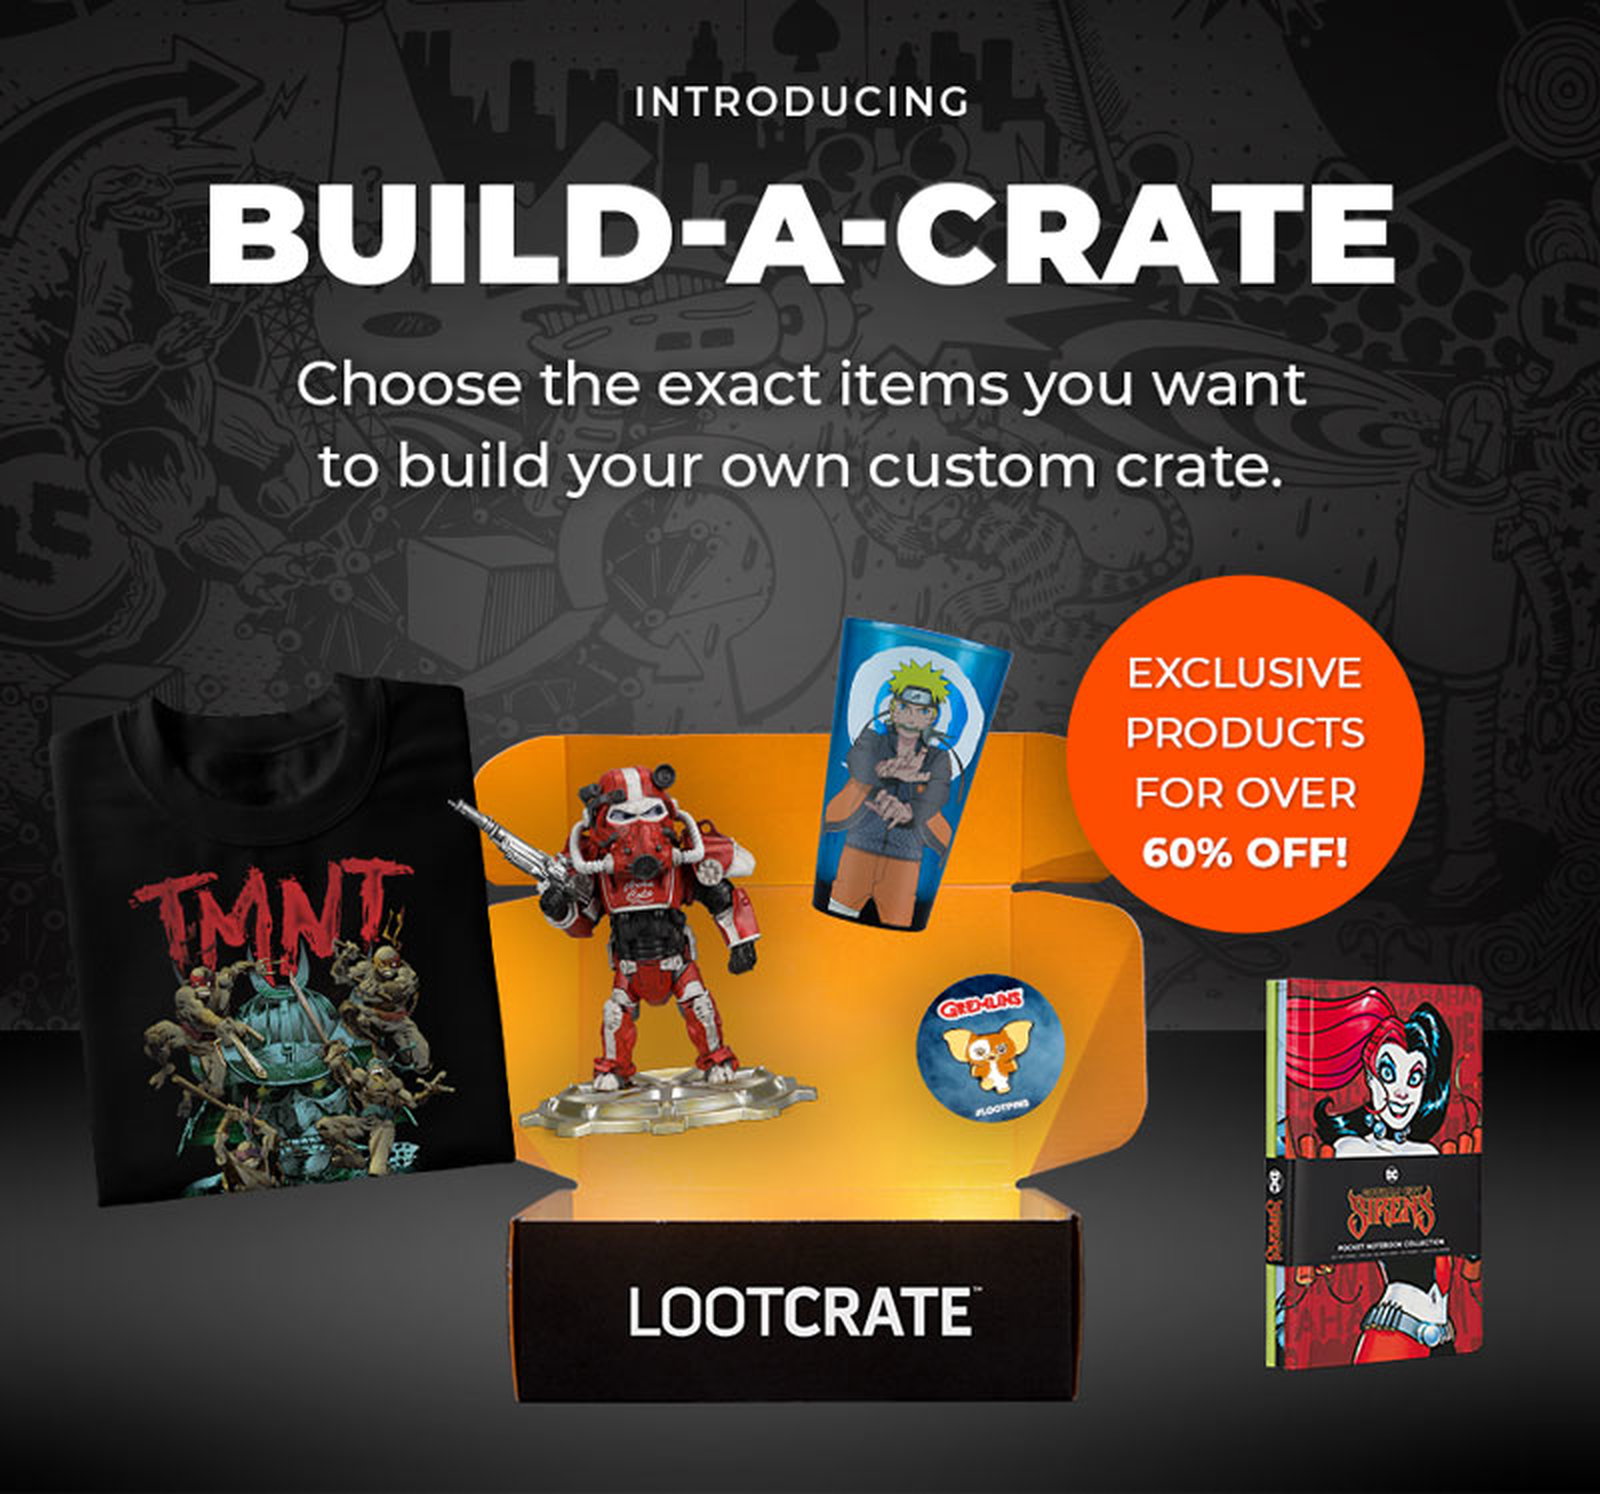 Loot Crate: Build your own custom crate!